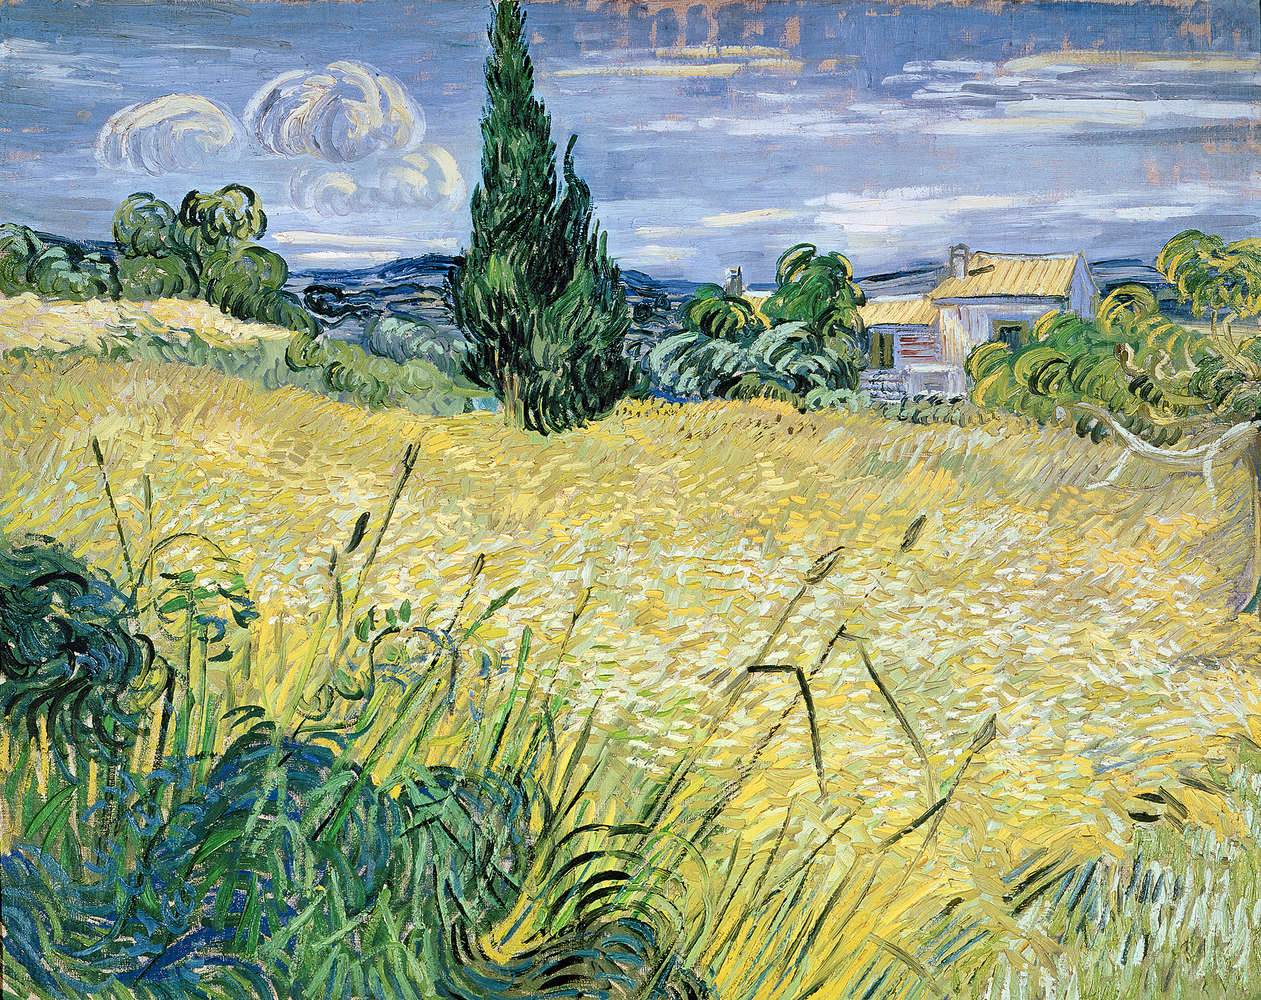             Green wheat field with cypress" mural by Vincent van Gogh
        